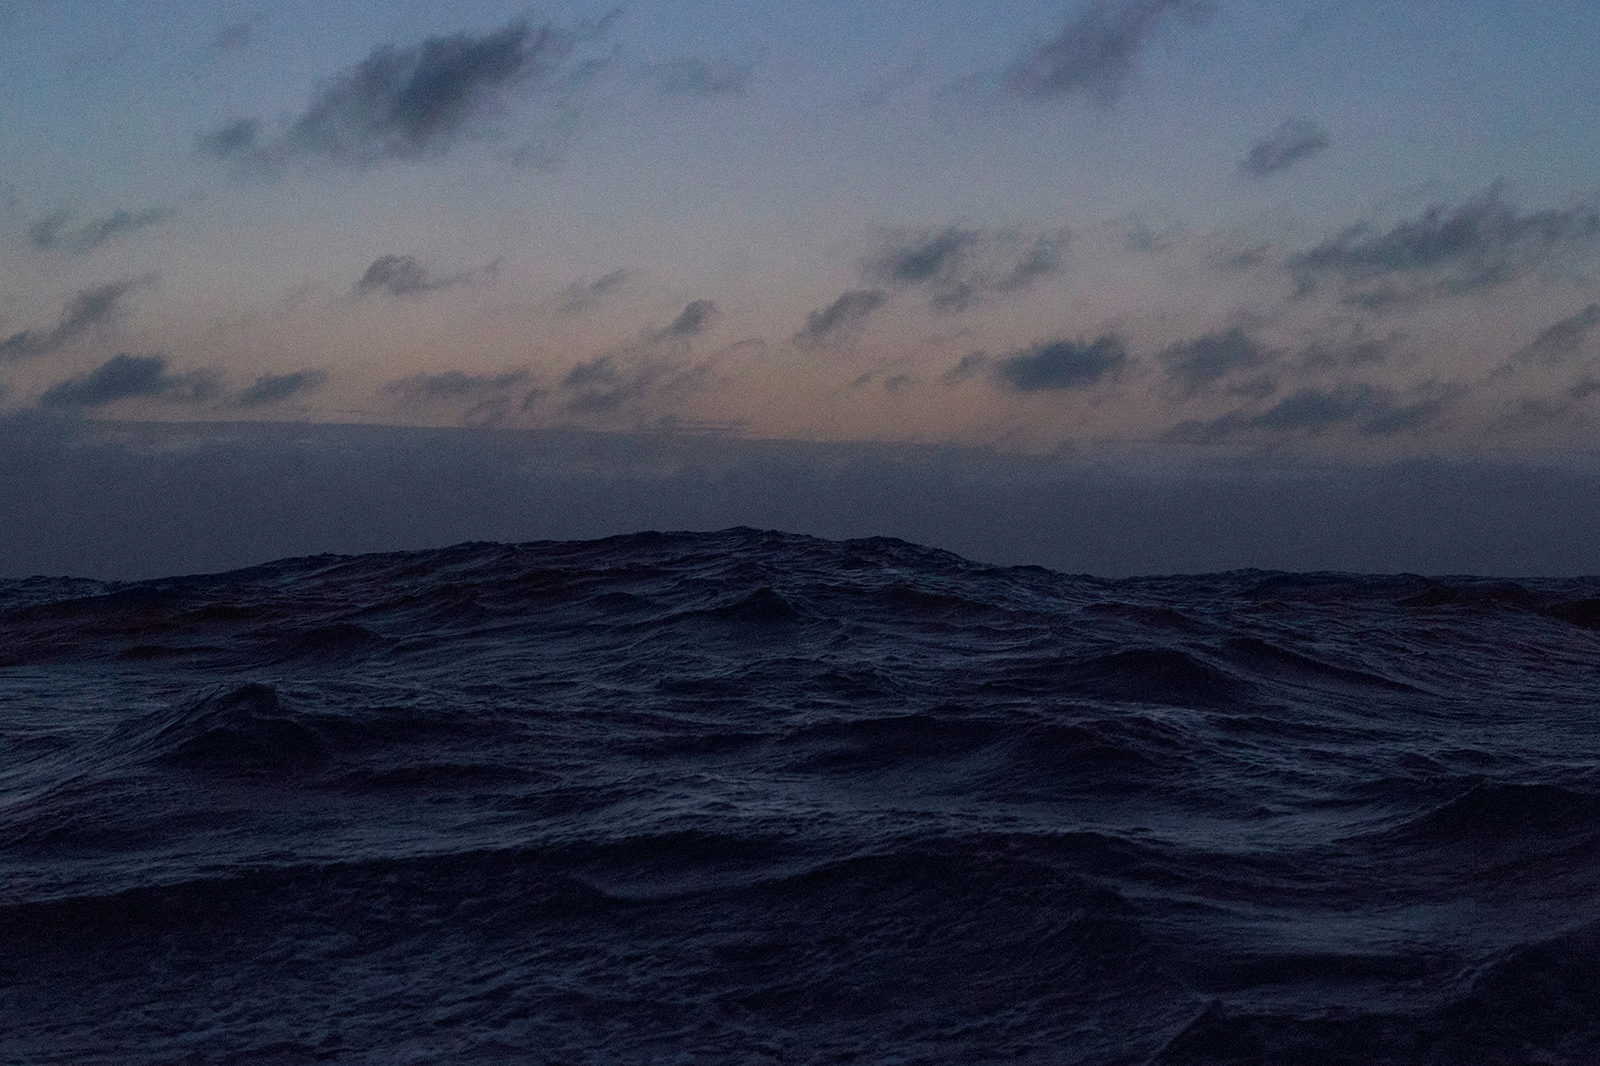 The Midnight Ocean is a photograph taken in the middle of the Atlantic ocean at blue hour